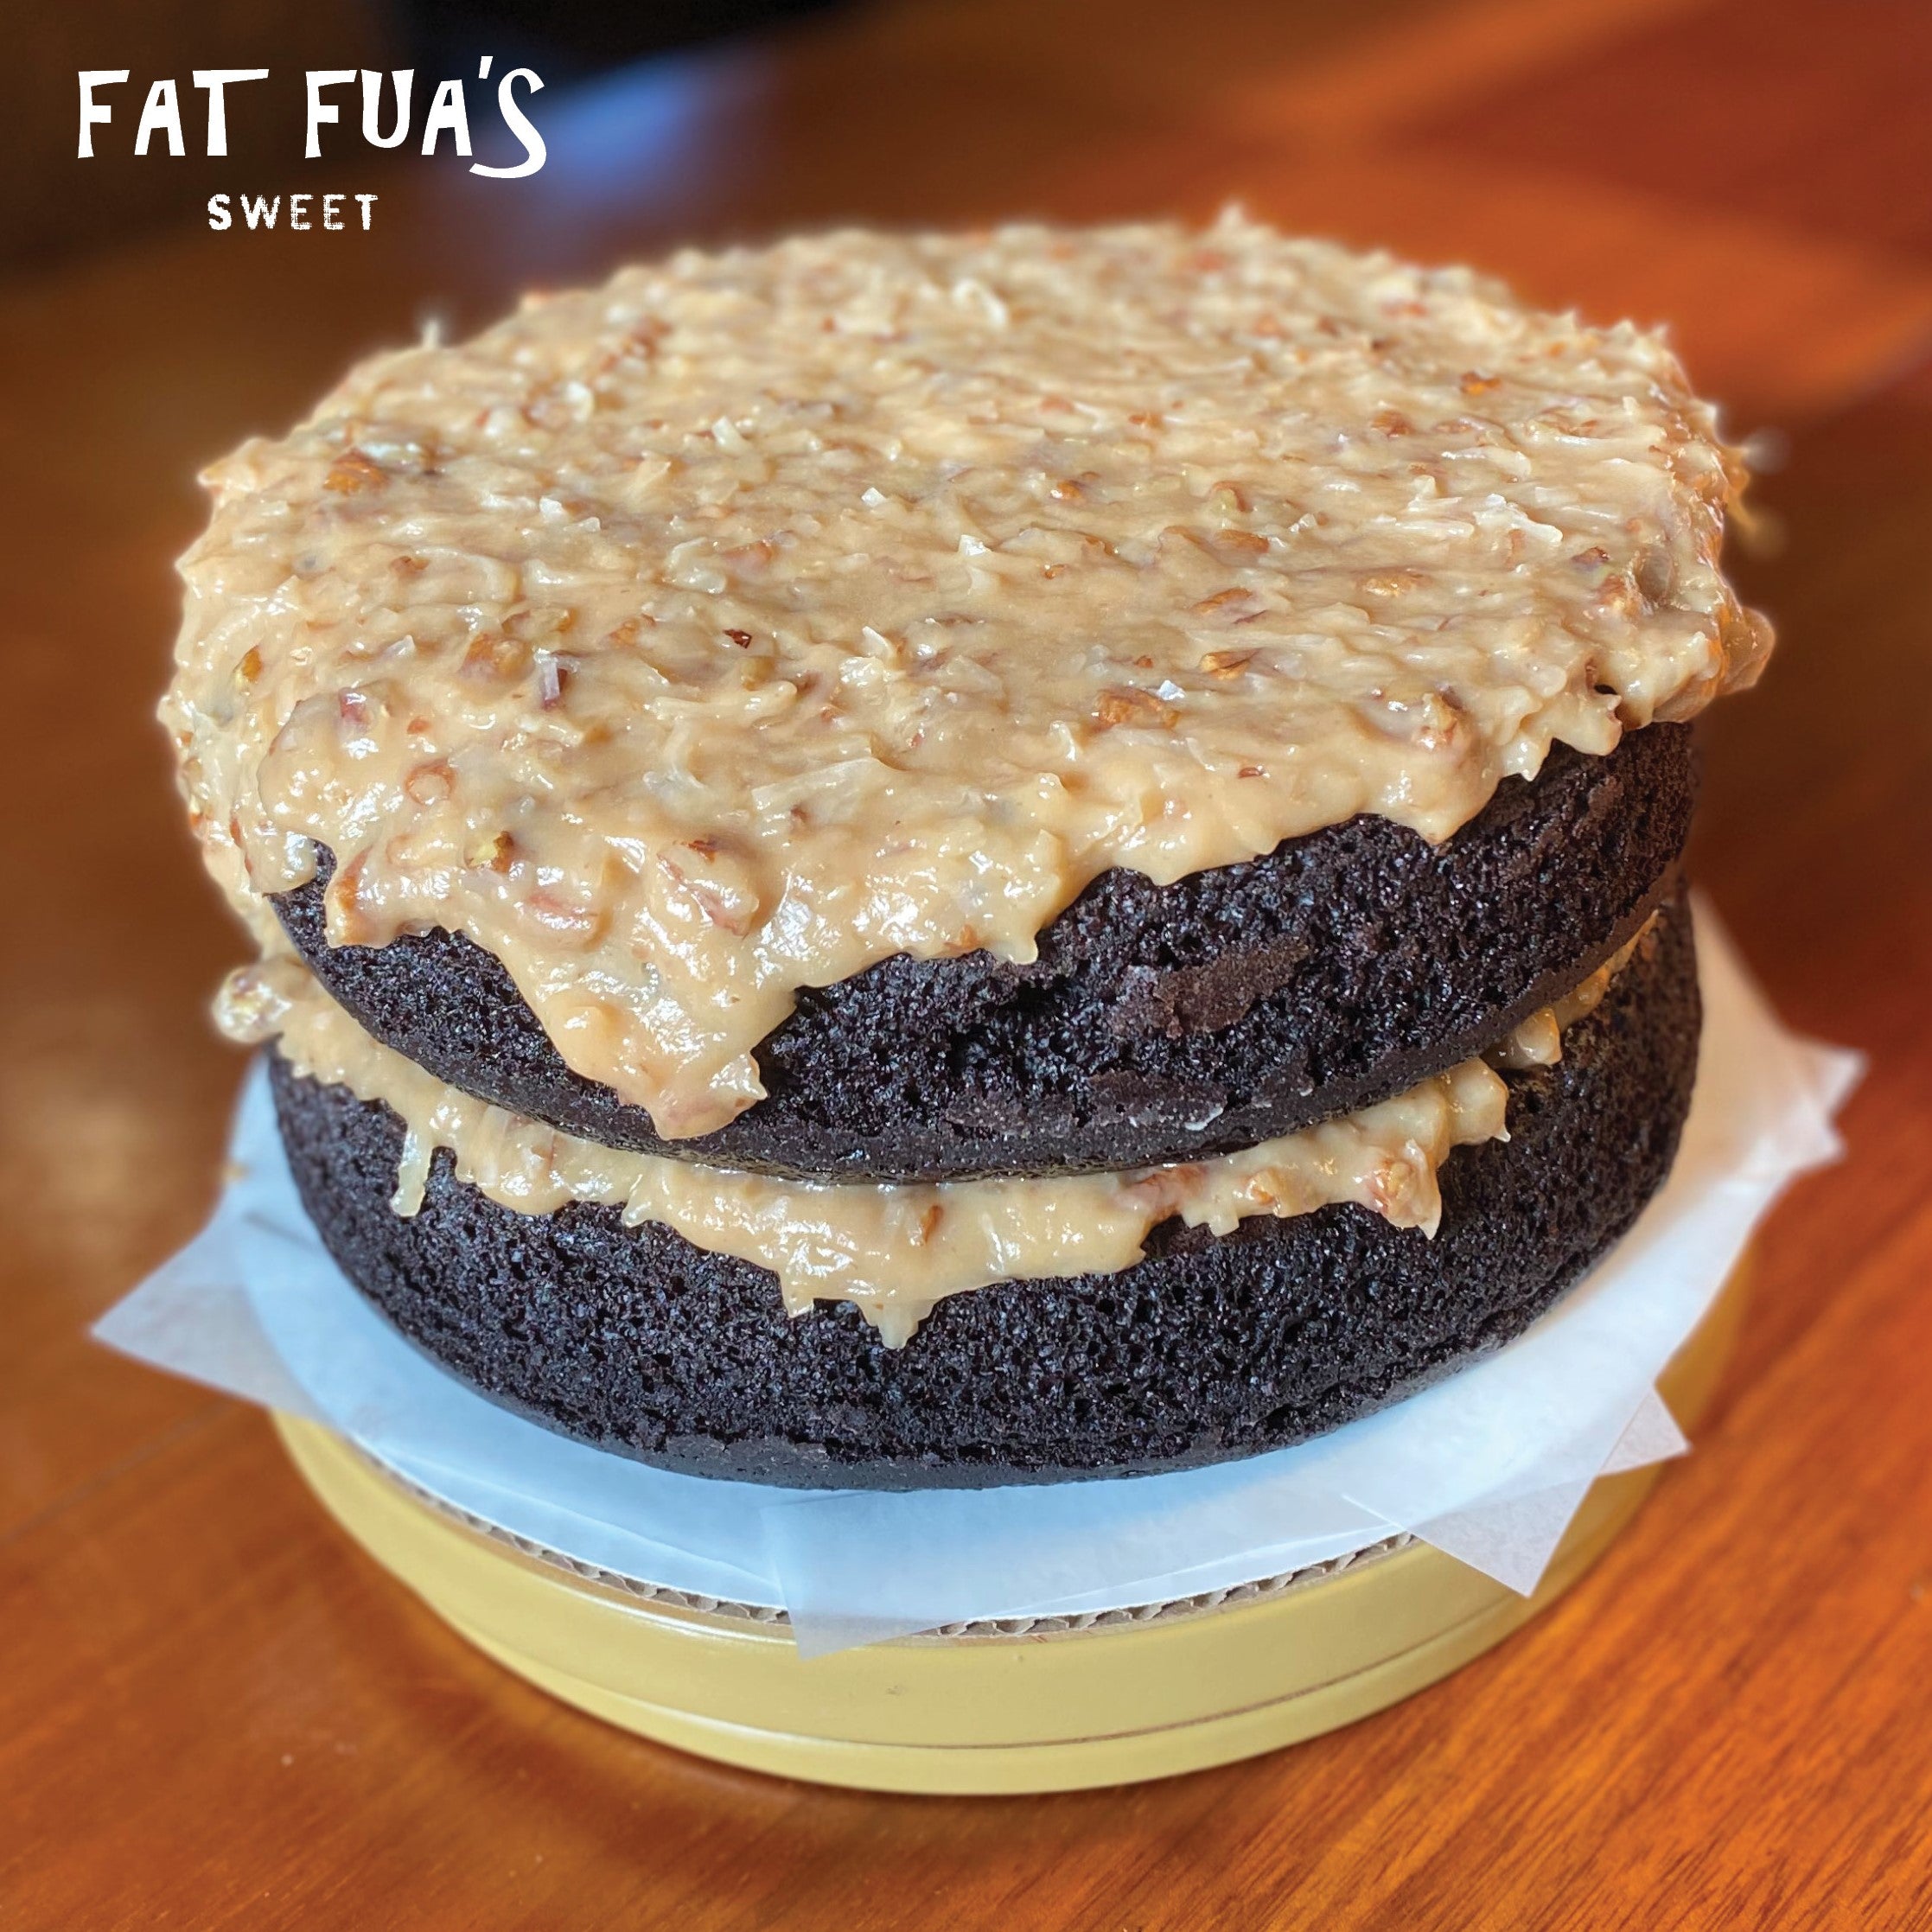 Inside vie of Fat German Chocolate cake showing 2 layers of moist of dark chocolate cake with made from scratch creamy butter pecan and coconut frosting